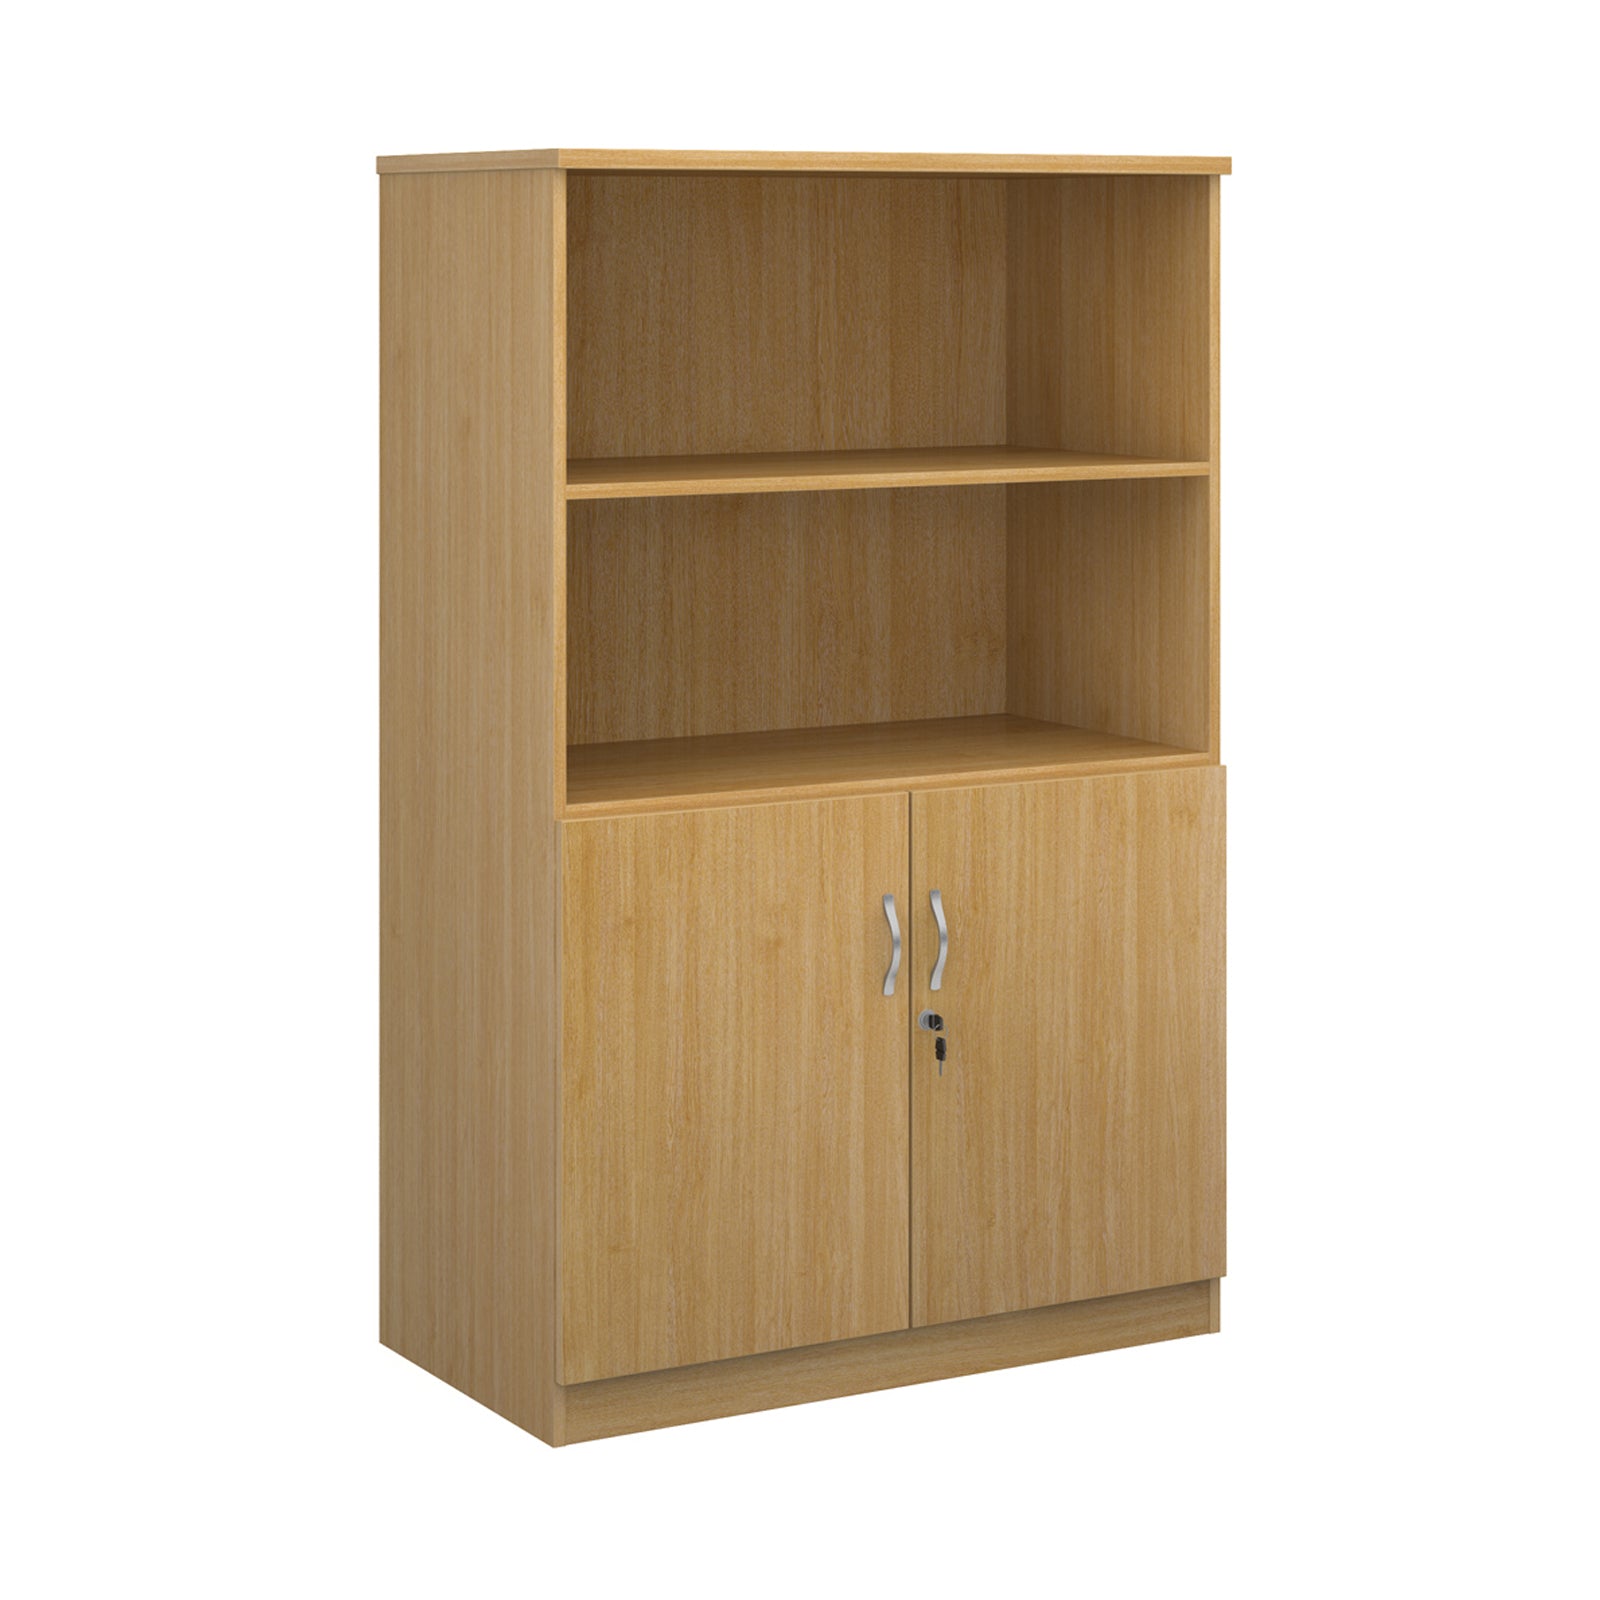 Deluxe Three or Four Shelf 1020mm Wide Combination Open Bookcase